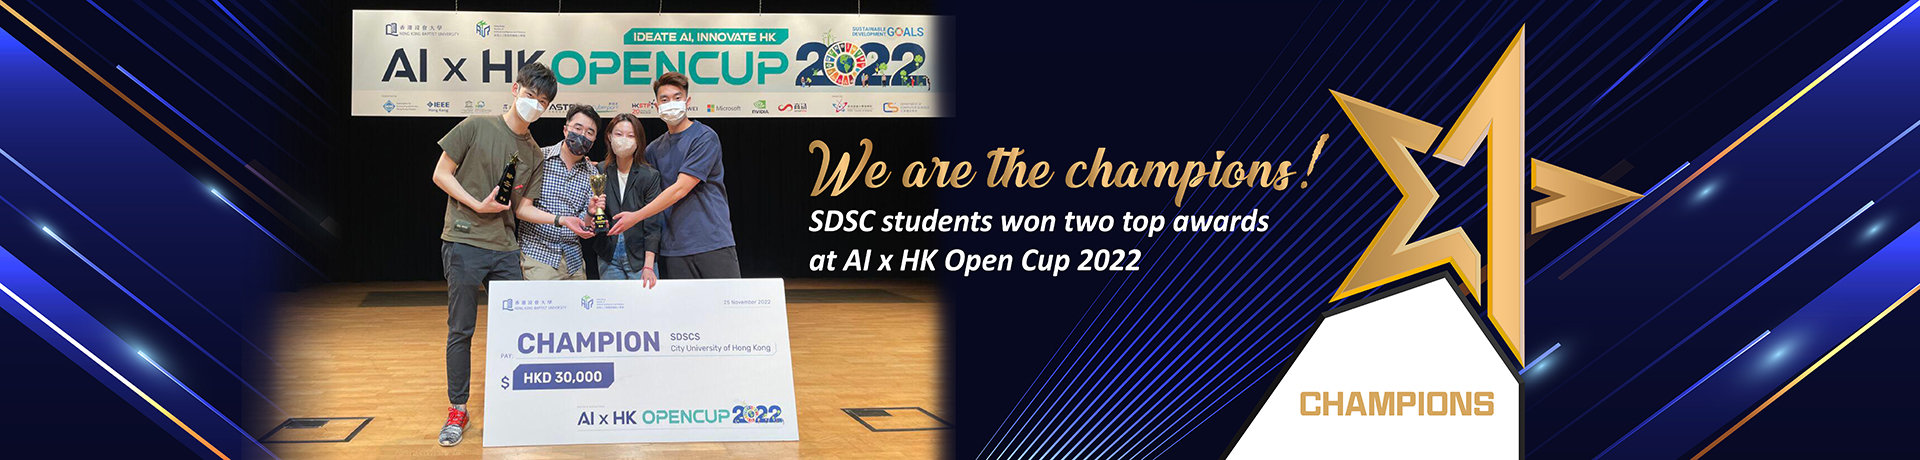 SDSC students won two top awards at AI x HK Open Coup 2022